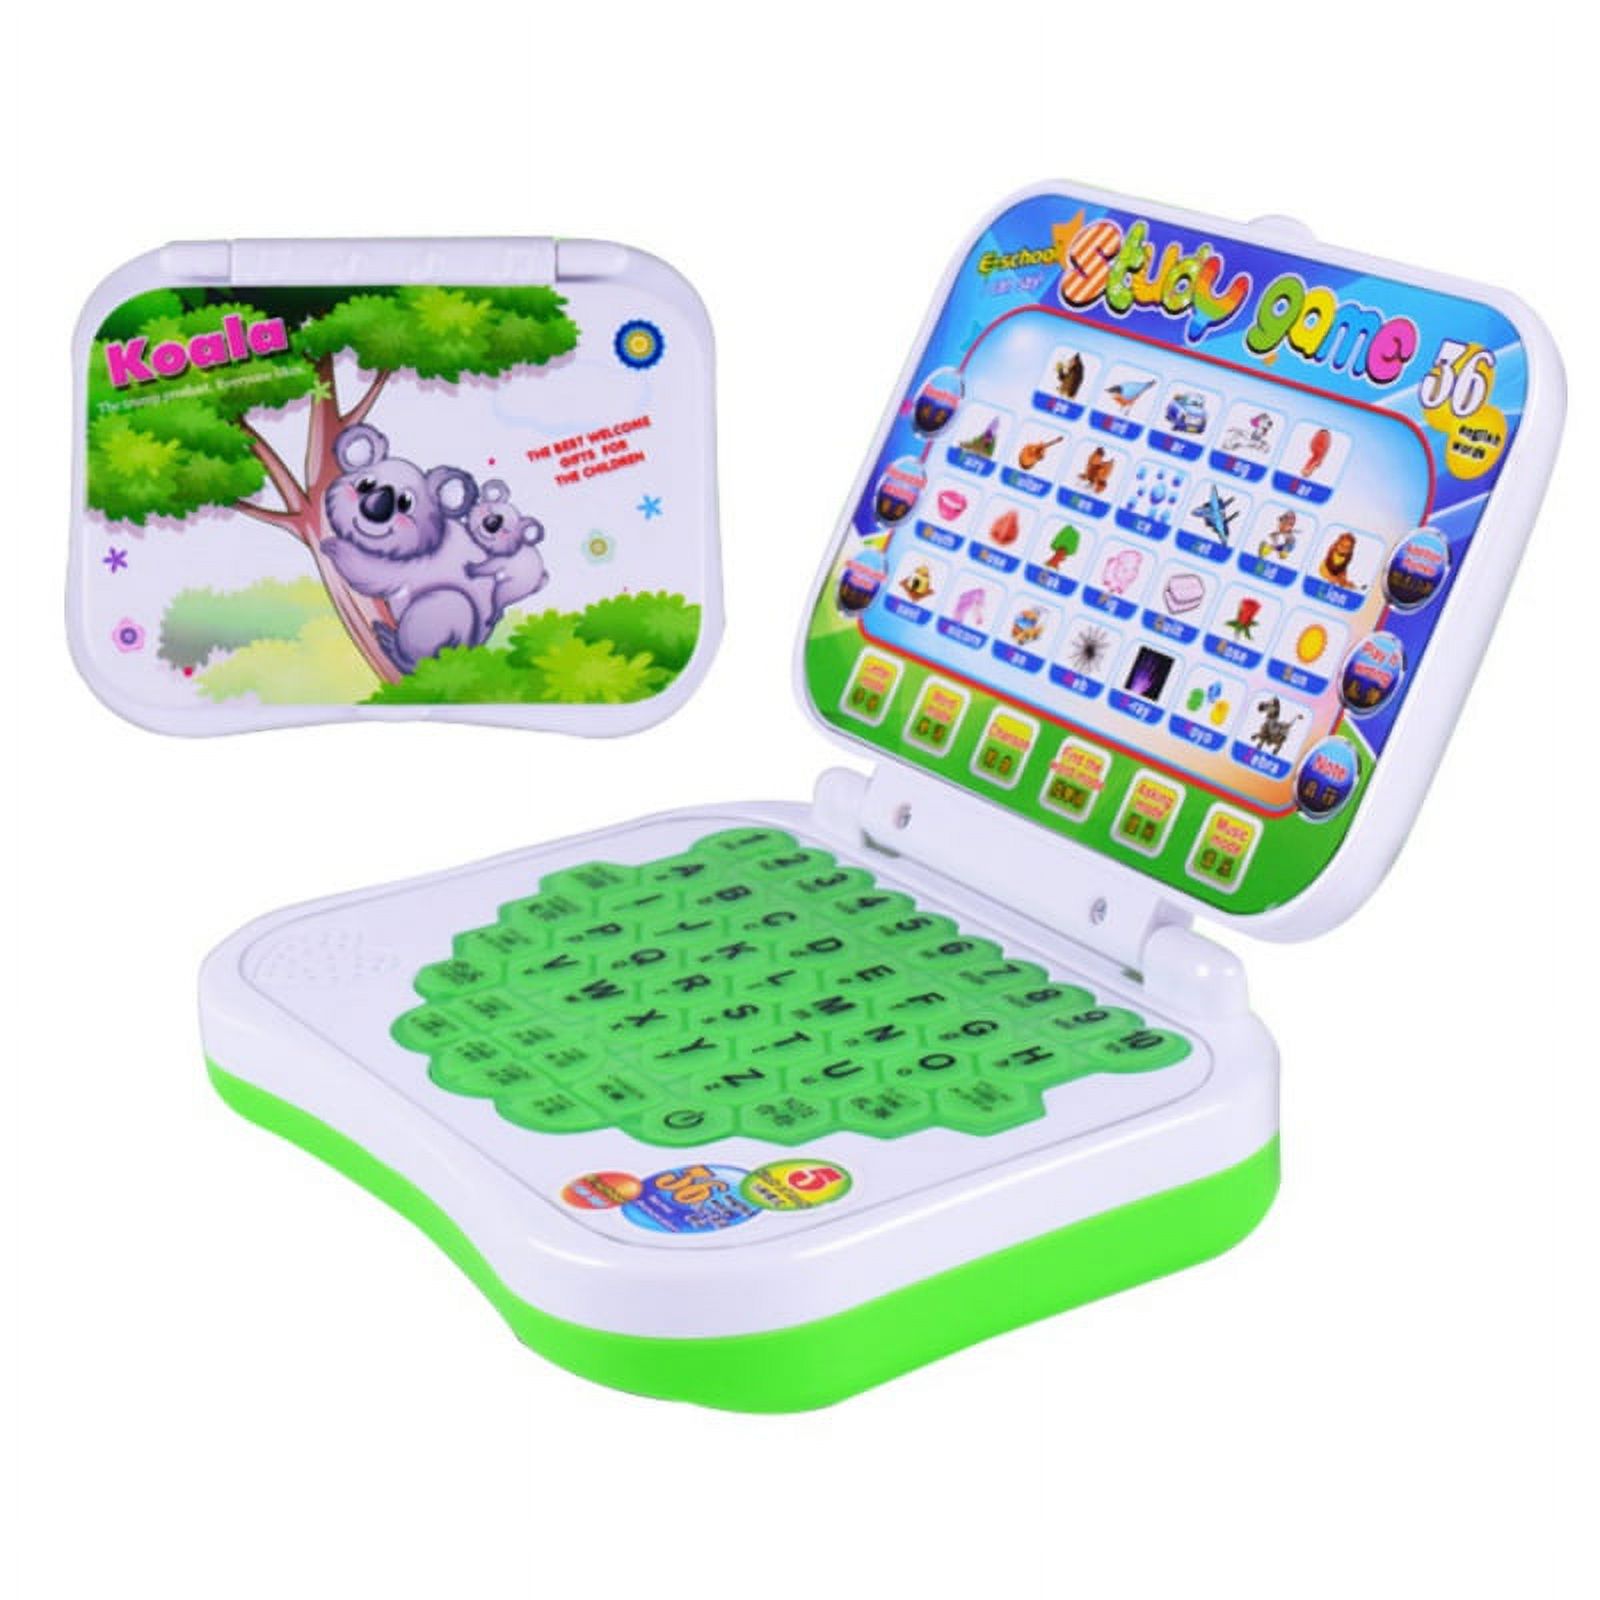 Toy Computer Laptop Tablet Baby Children Educational Learning Machine Toys Electronic Kids Study Game - image 4 of 14